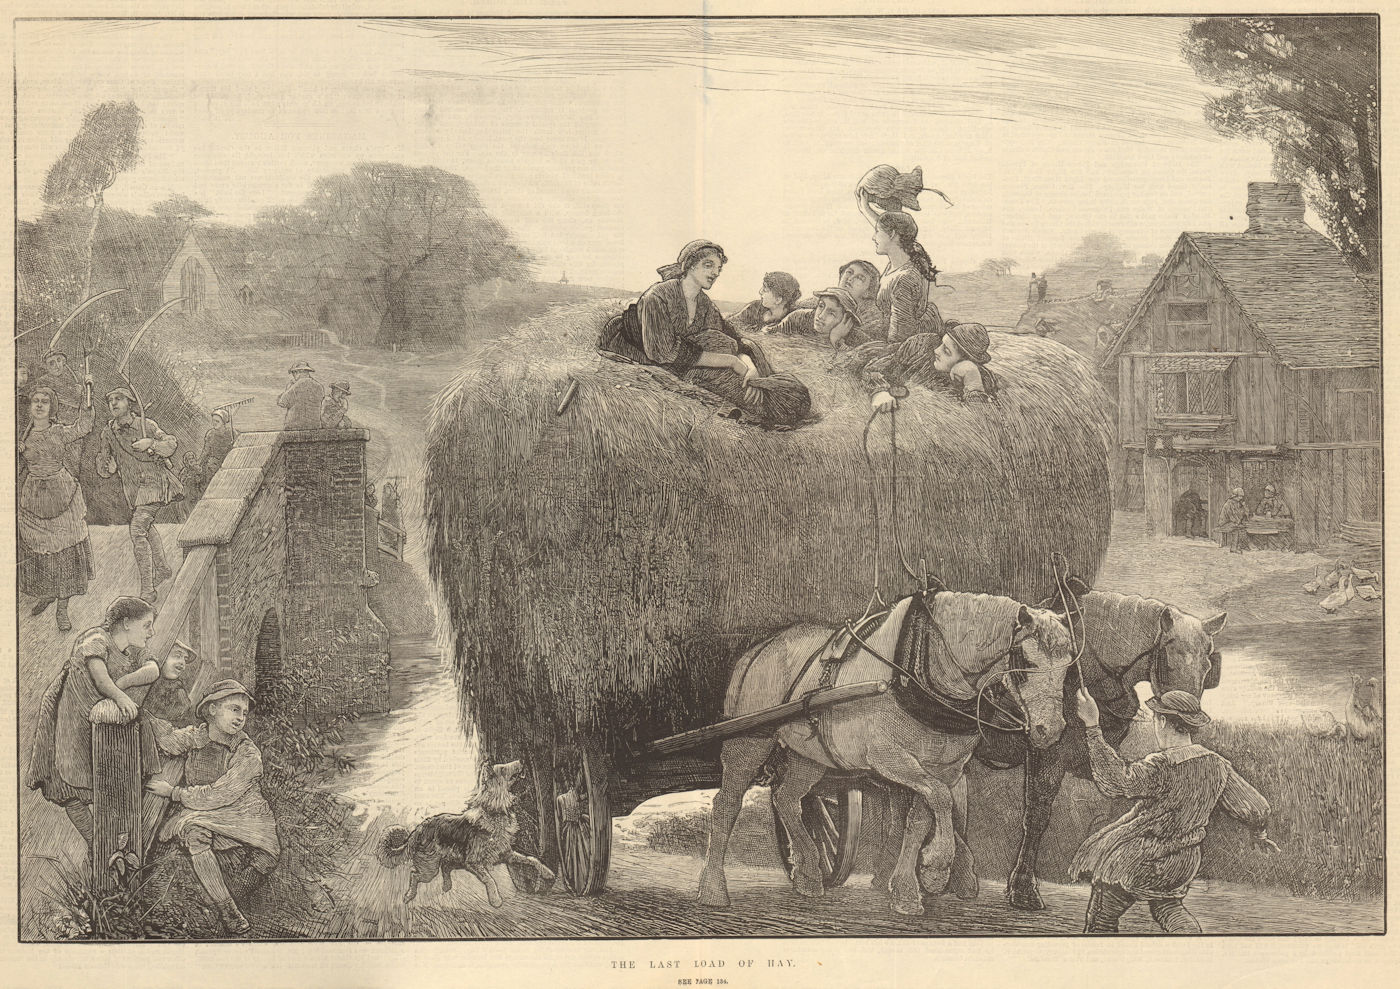 Associate Product The last load of hay. Farming. Family 1881 old antique vintage print picture